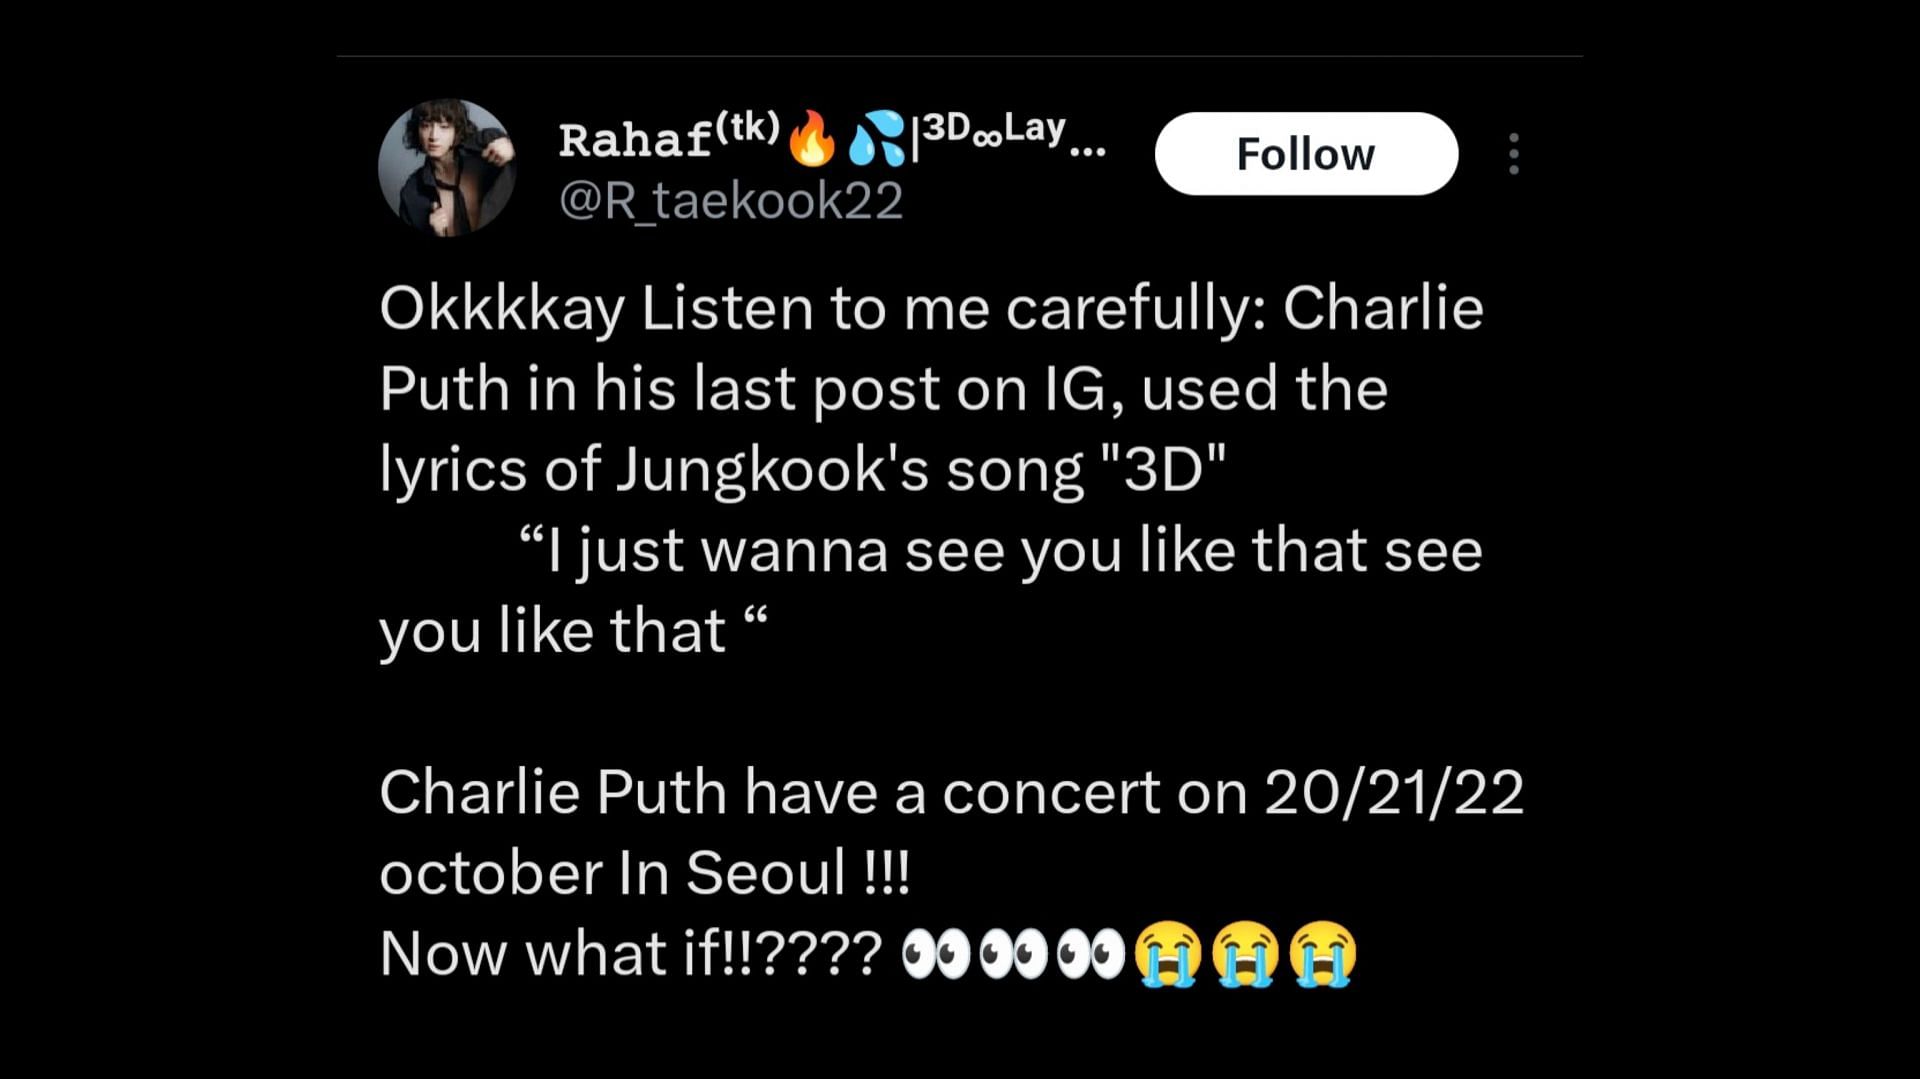 Fans speculate Seven singer might join Charlie Puth&rsquo;s Seoul concert over latter&rsquo;s Instagram caption (Image via X)